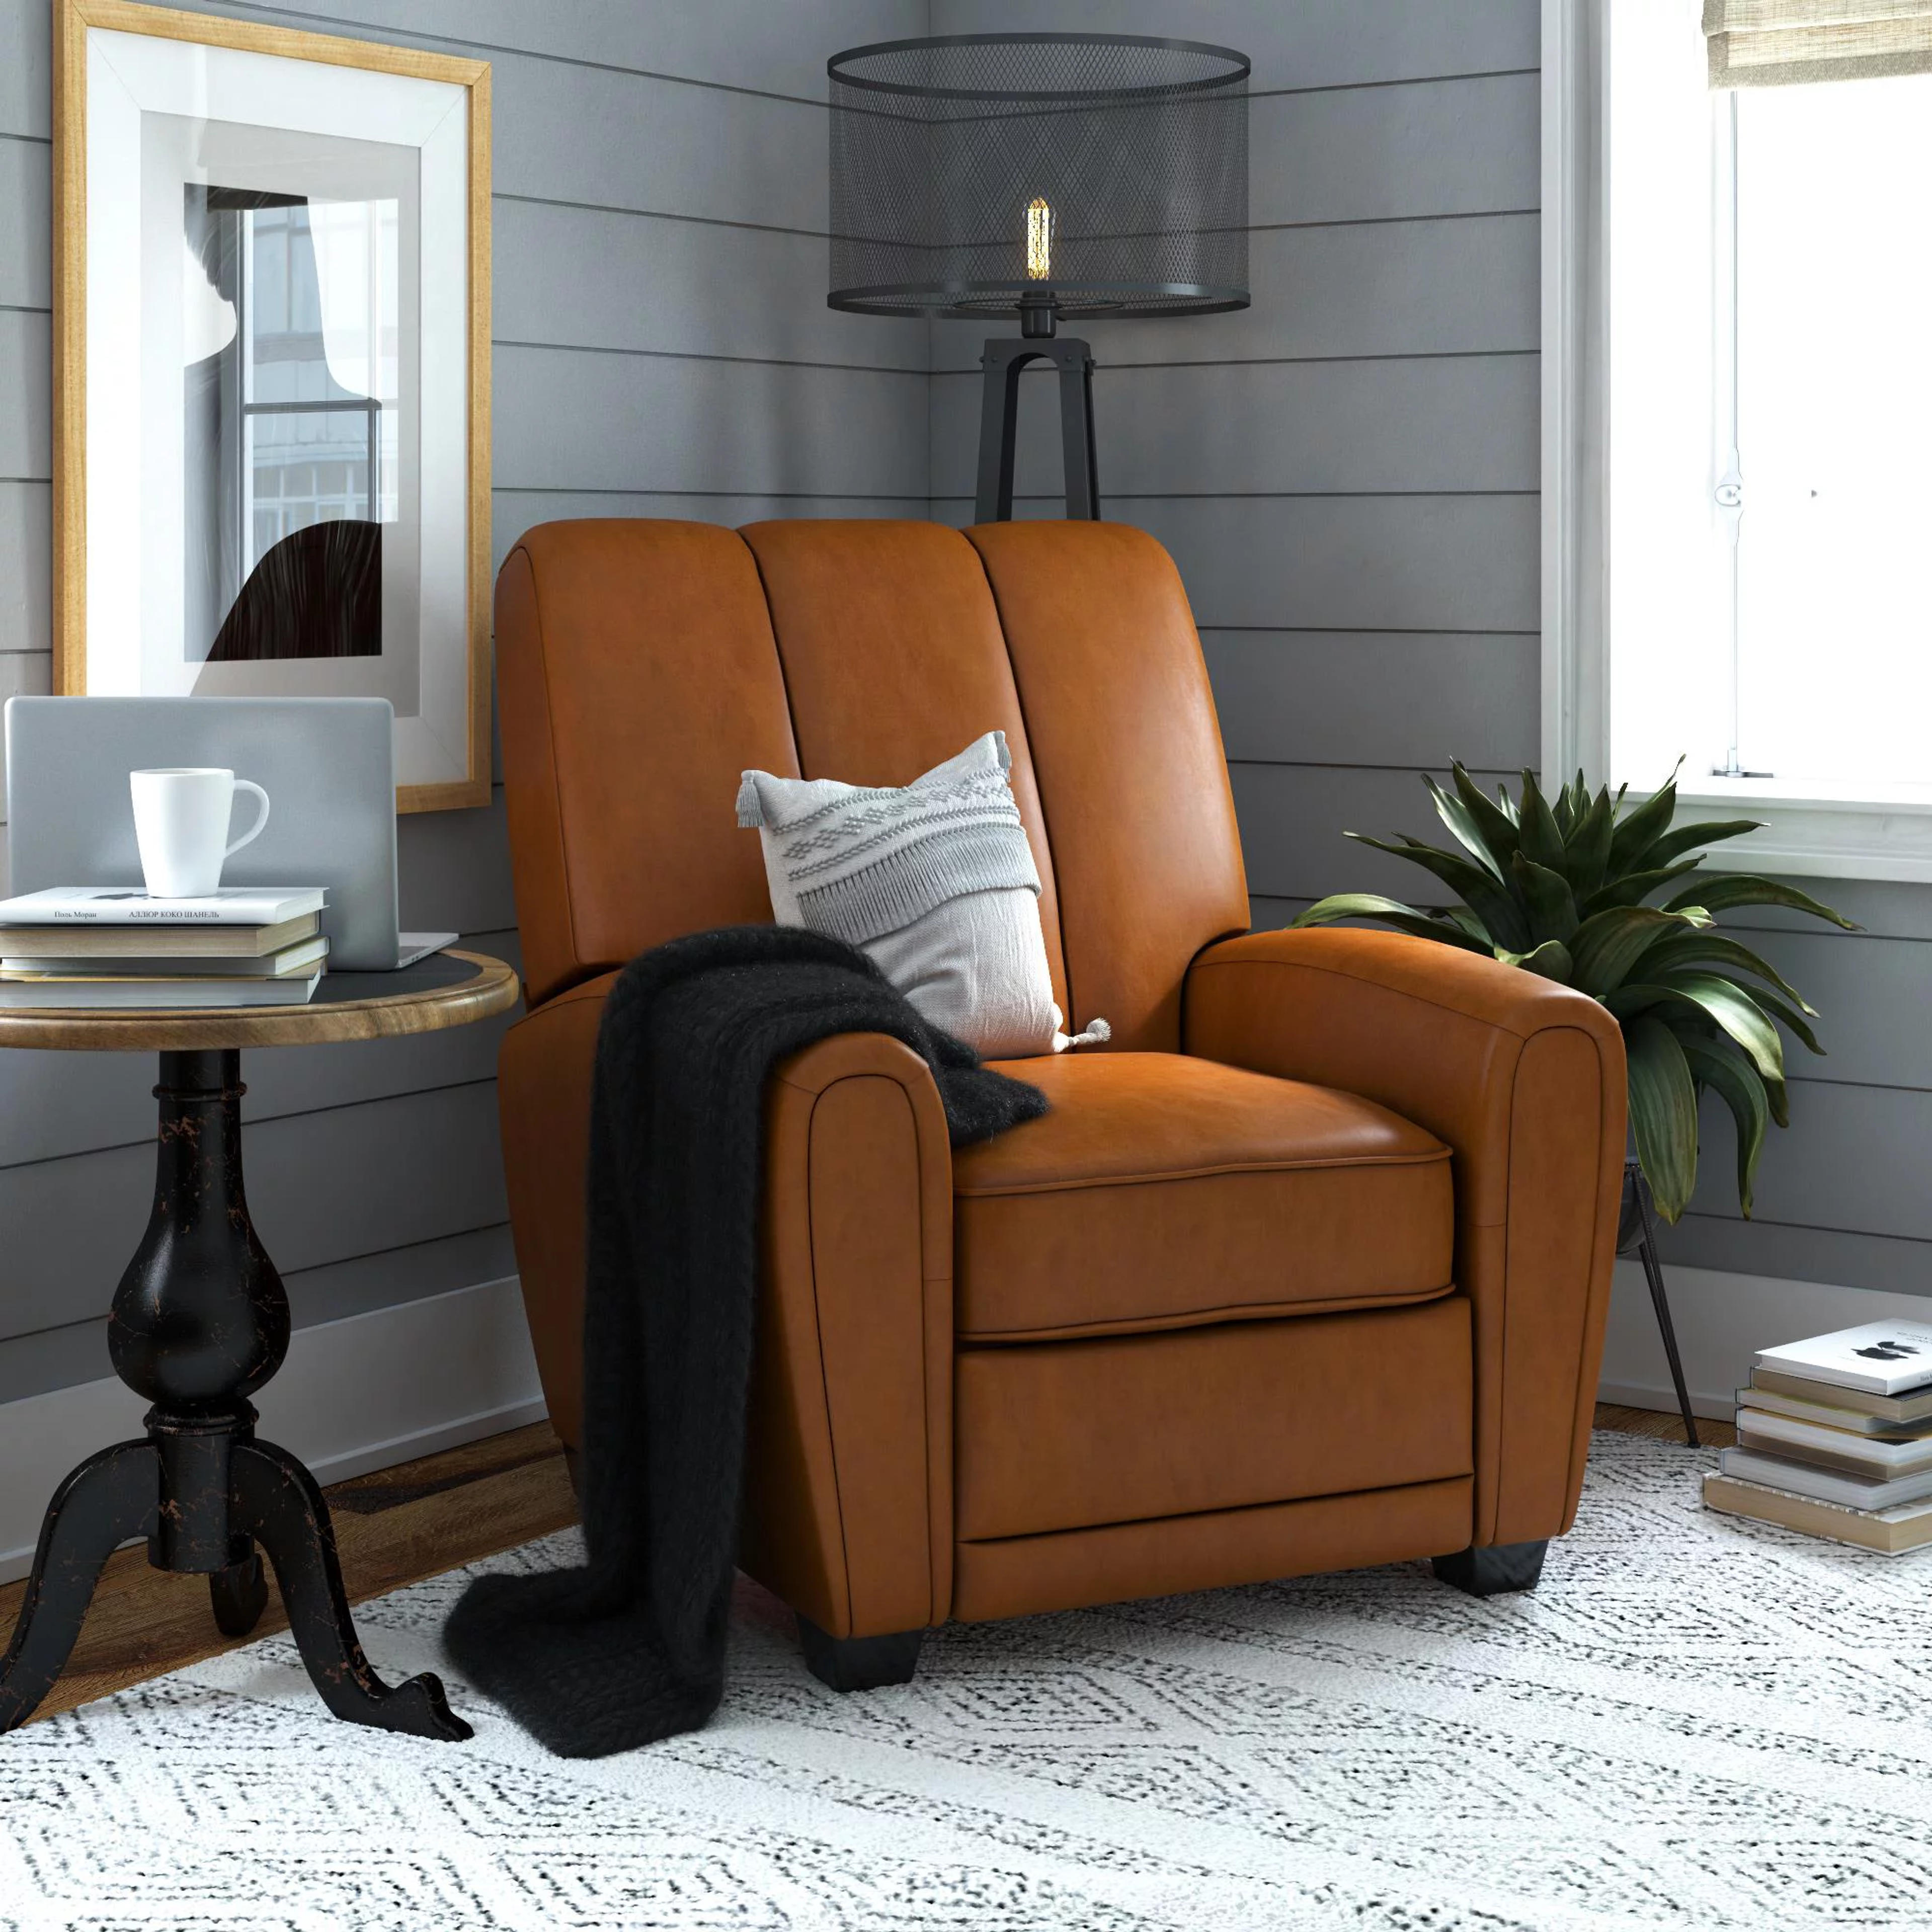 Better Homes & Gardens Vertical Channel Pushback Recliner Chair, Camel Faux Leather - Walmart.com